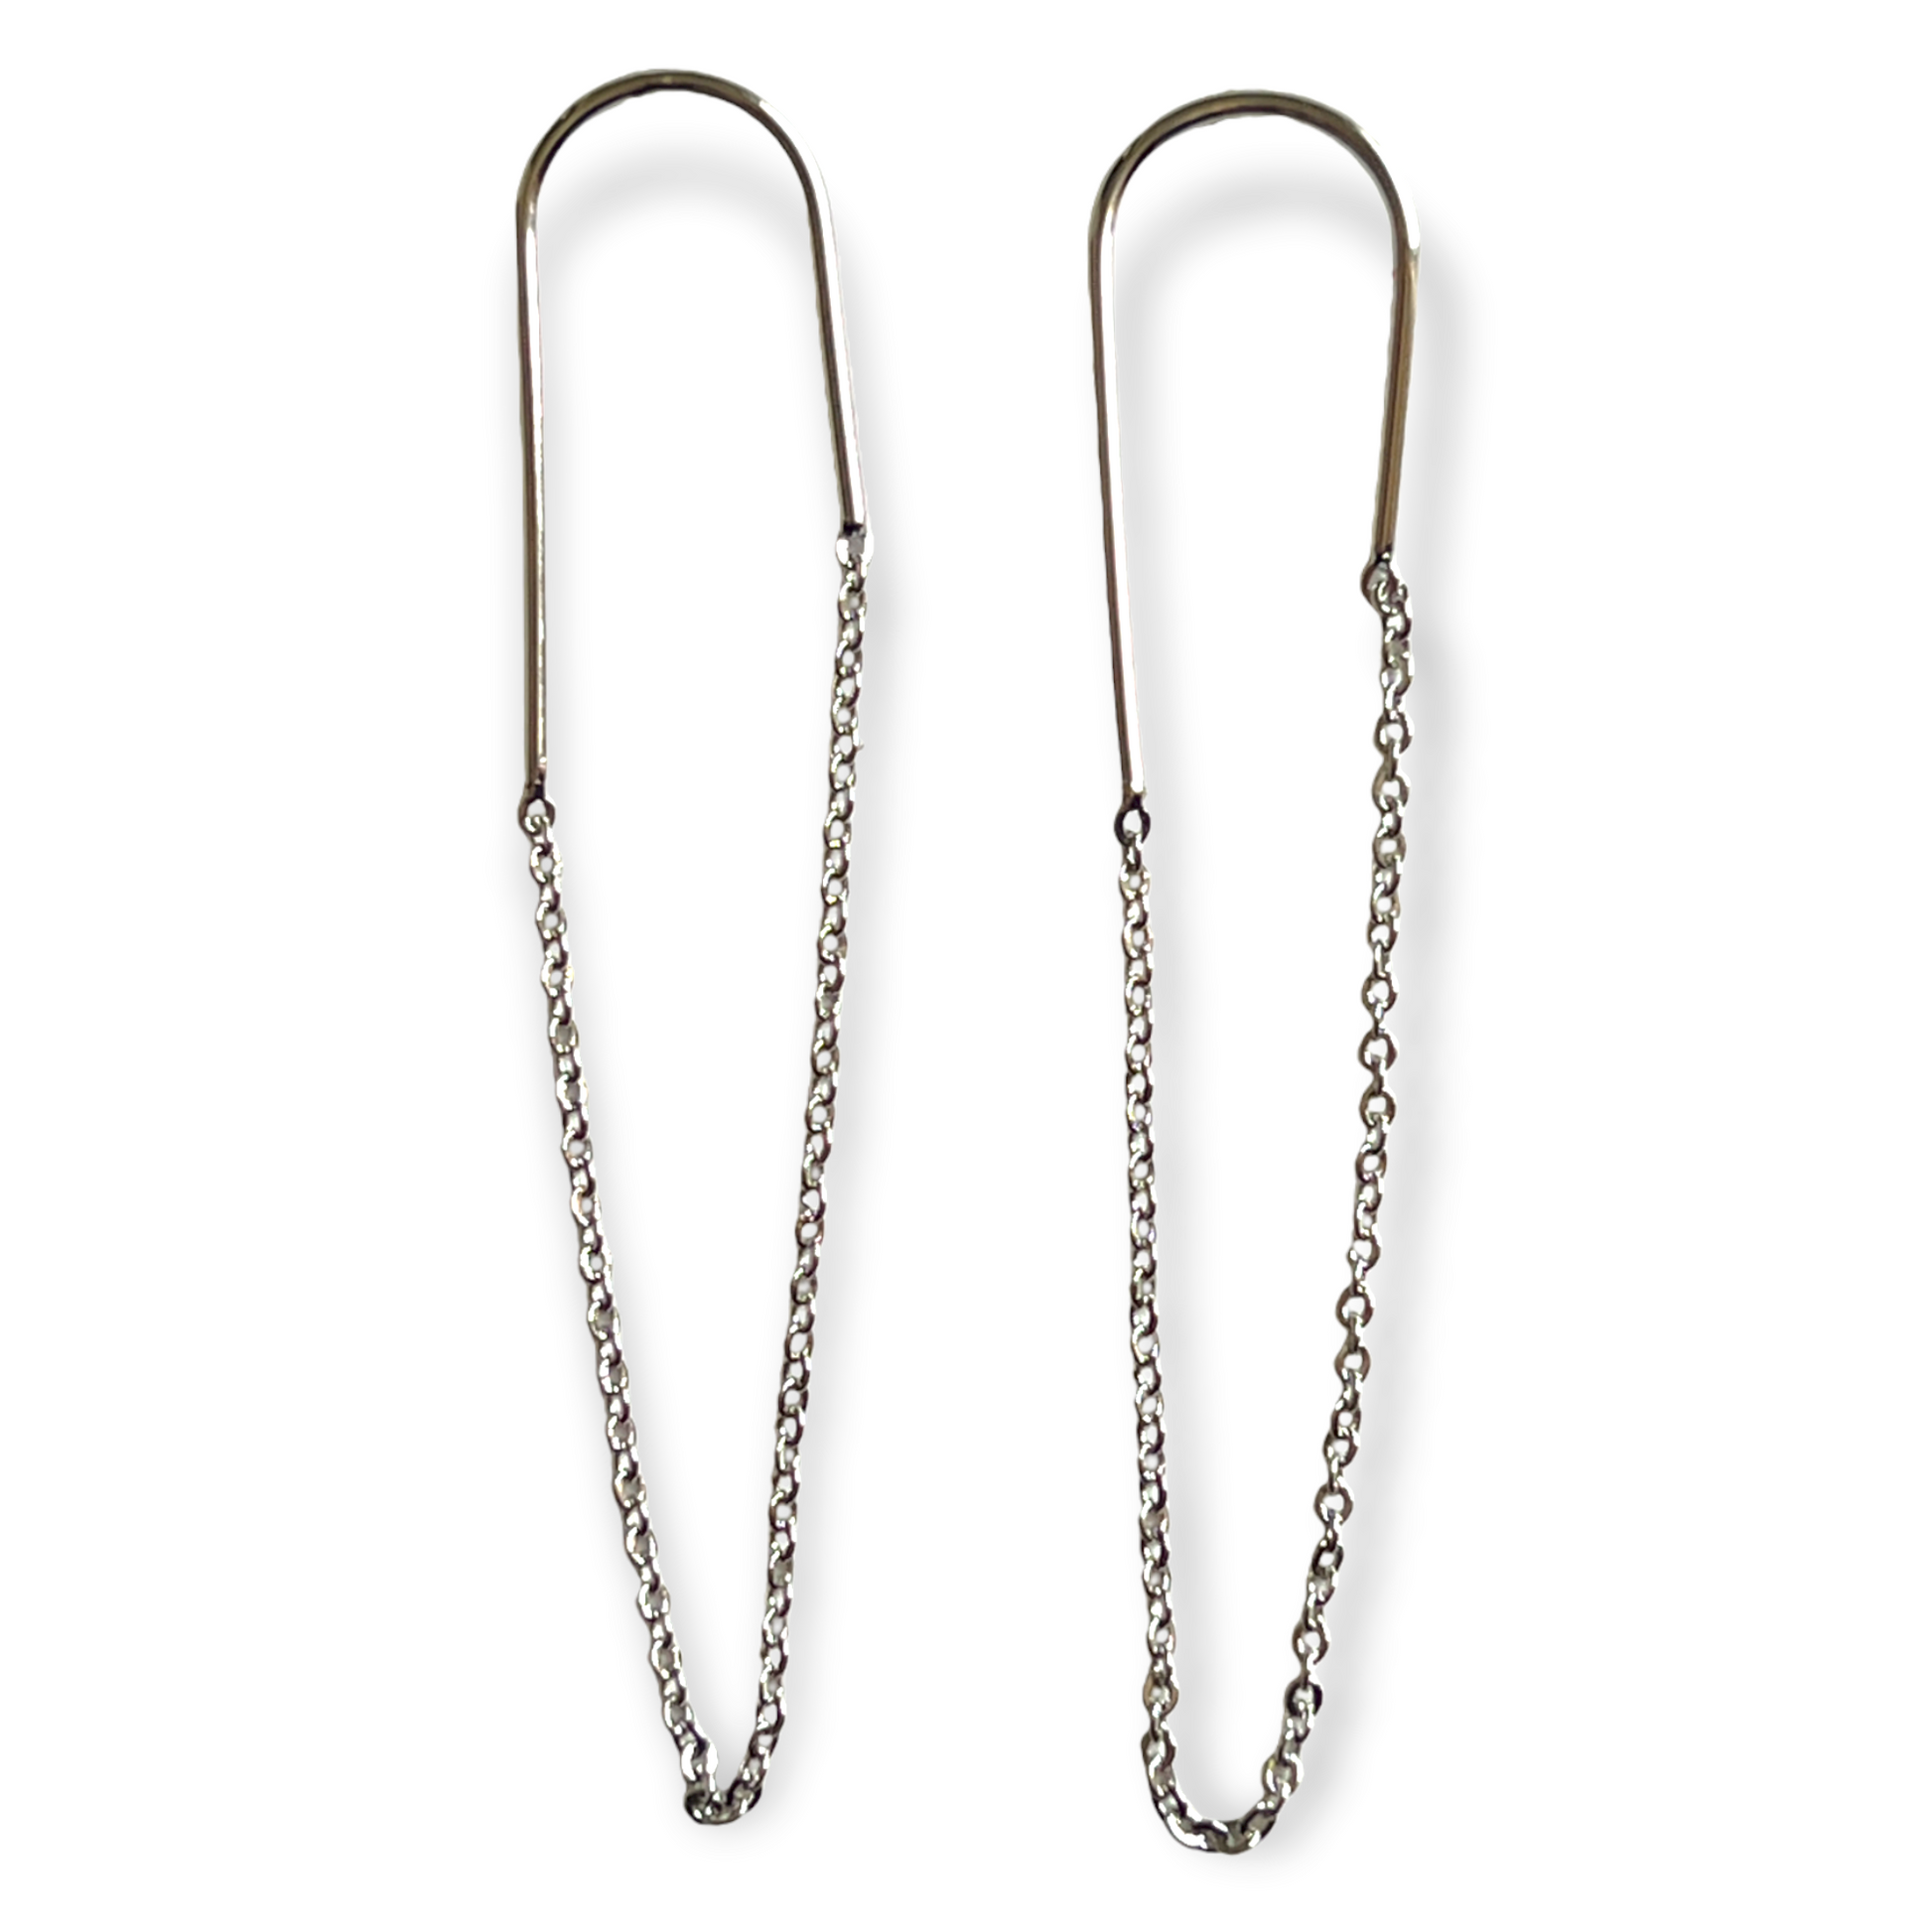 Inverted chain drop earrings for a delicate statement - Sundara Joon